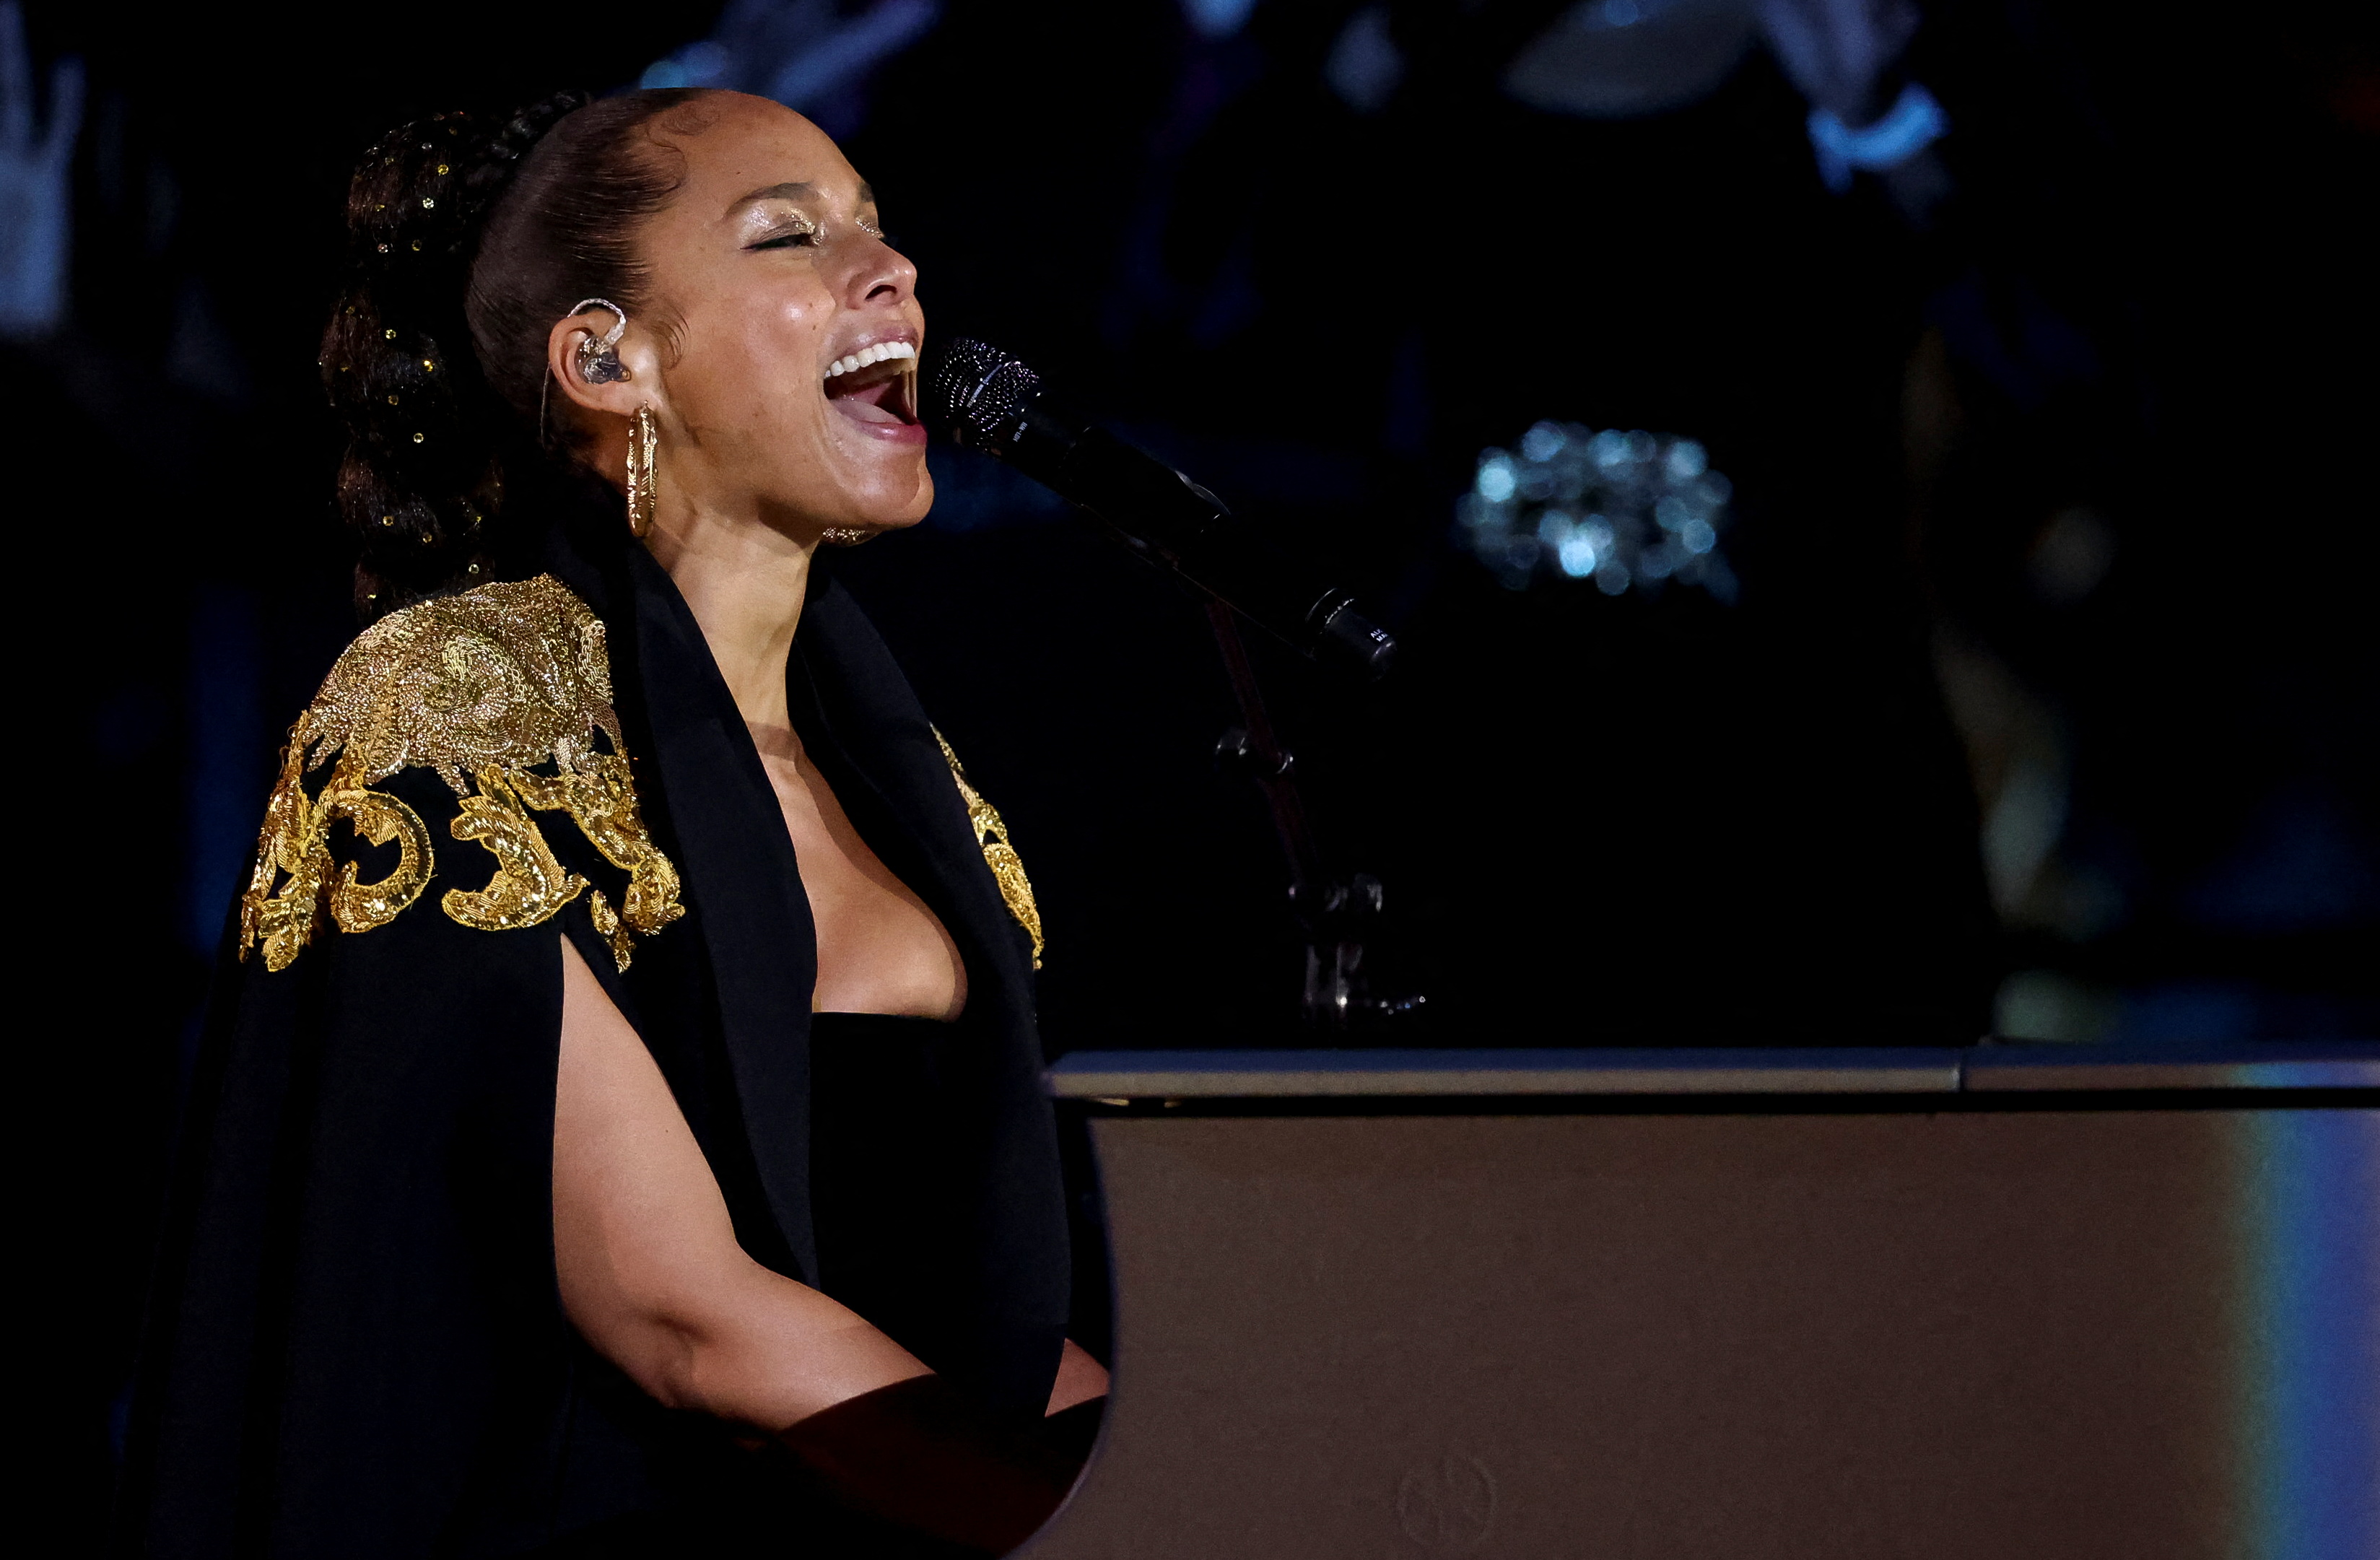 Alicia Keys performs at the BBC Platinum Party at the Palace, as part of the Queen's Platinum Jubilee celebrations, in London, Britain  June 4, 2022. REUTERS/Henry Nicholls/Pool